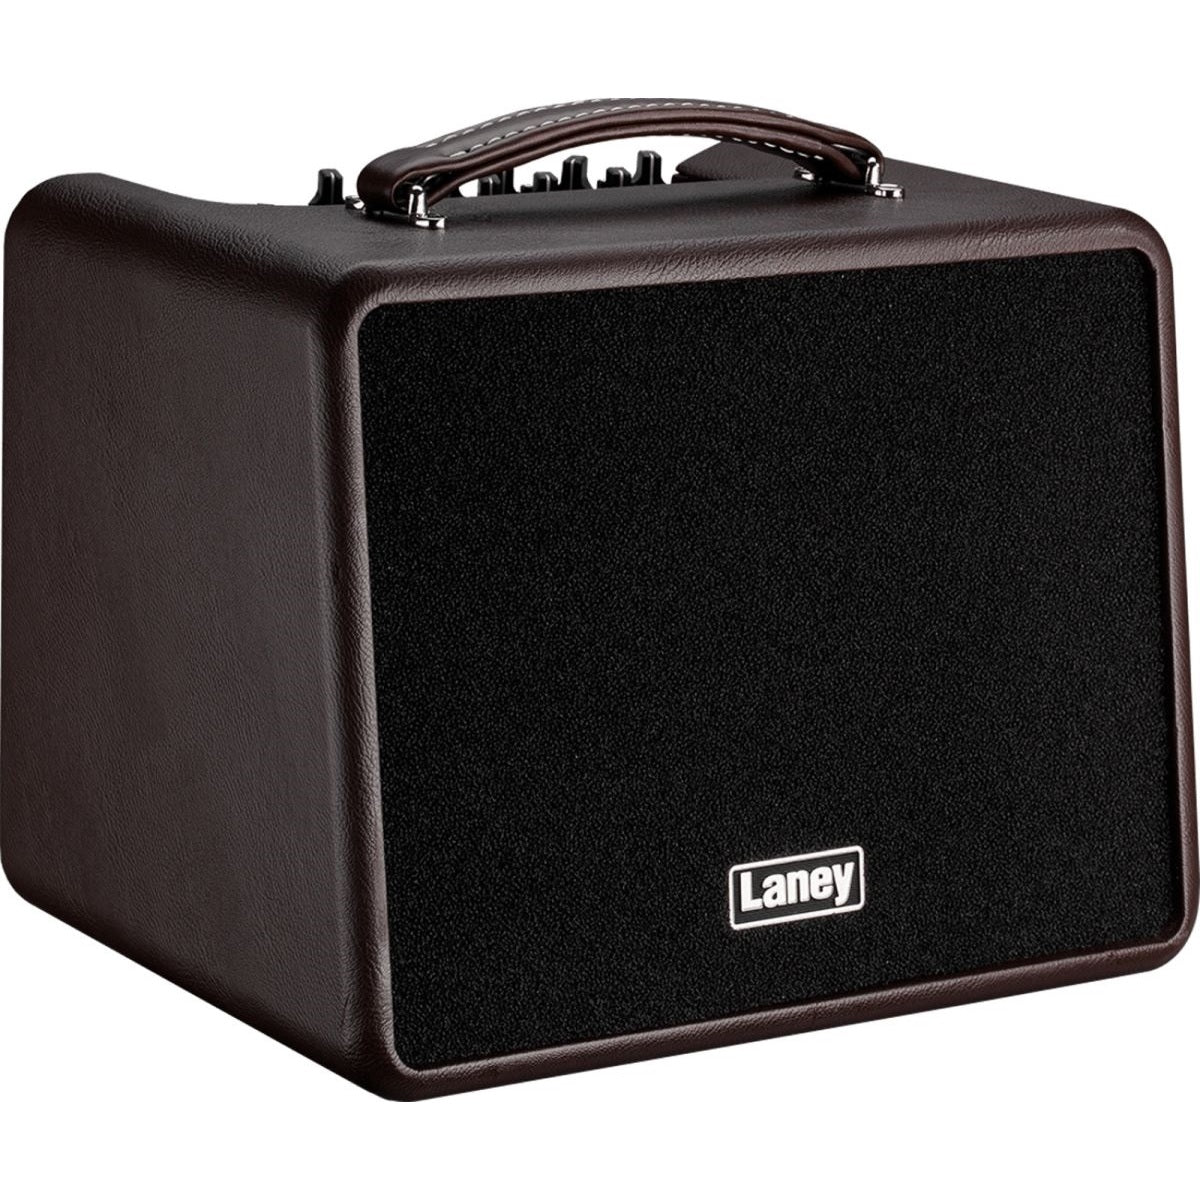 Laney A-Solo 60 Watts 2-way Channel Portable Acoustic Guitar Amplifier with Feedback Elimination Control Feature